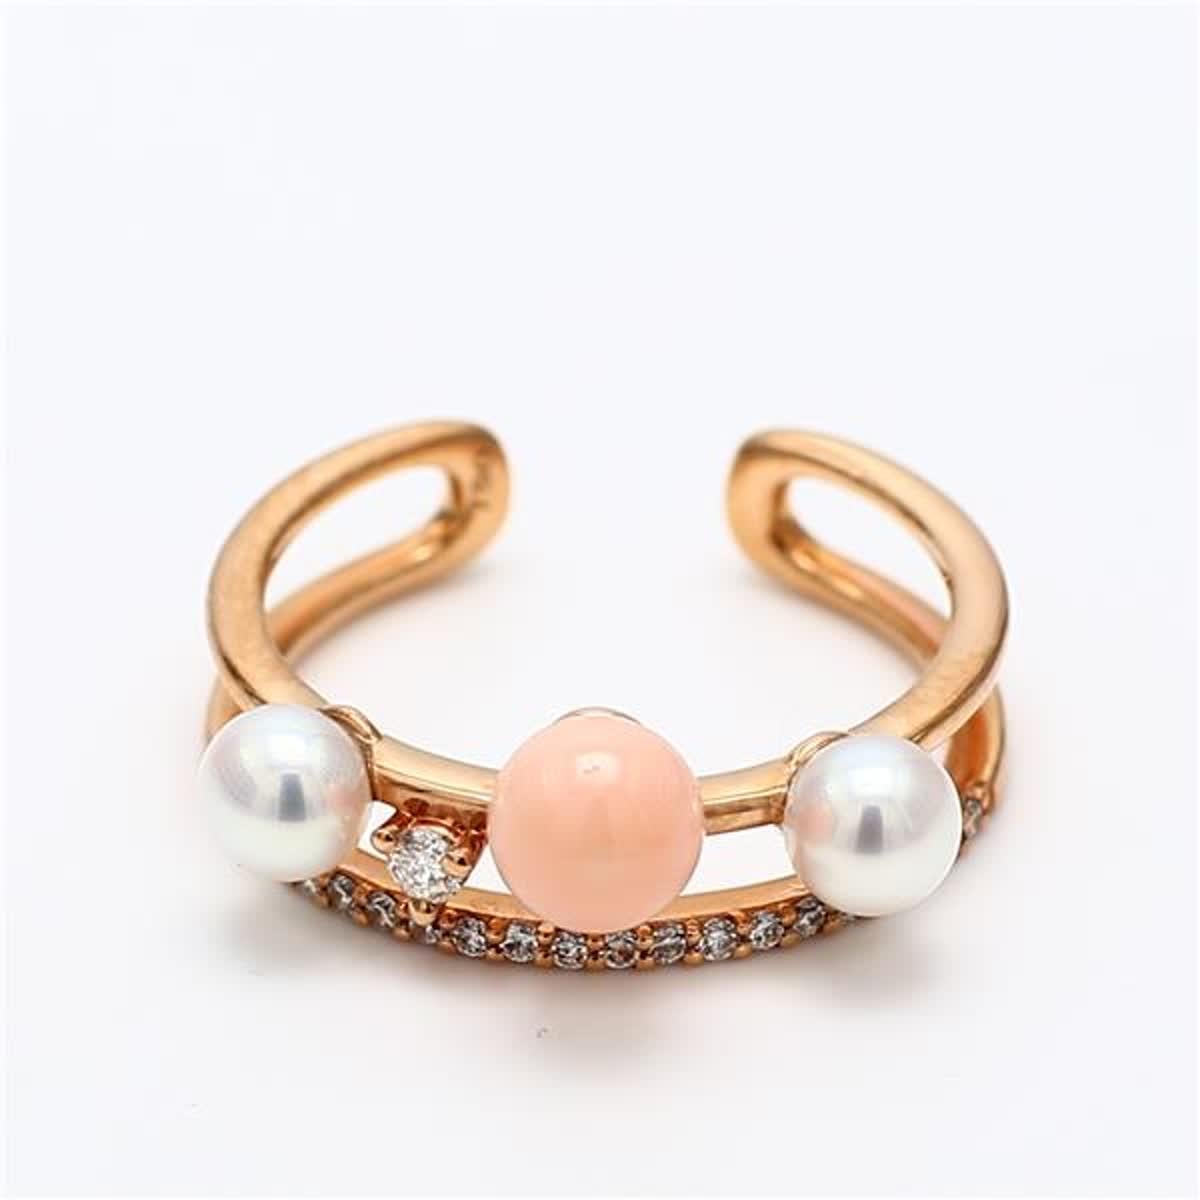 RareGemWorld's classic fashion ring. Mounted in a beautiful 18K Rose Gold setting with natural white pearl, pink corralium secundum, and natural round white diamond melee. This ring is guaranteed to impress and enhance your personal